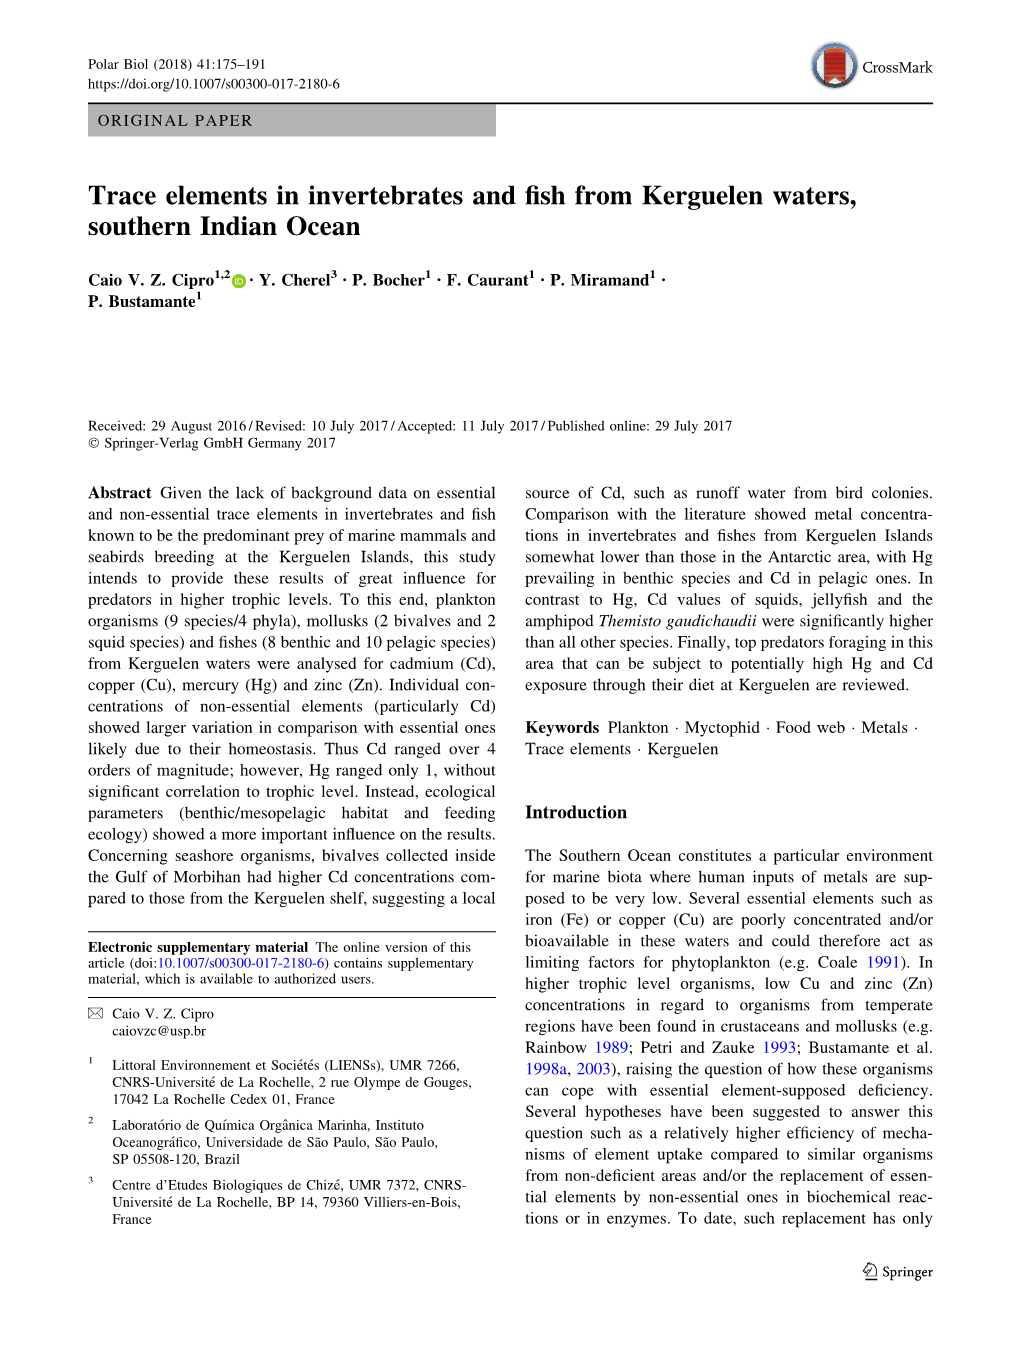 Trace Elements in Invertebrates and Fish from Kerguelen Waters